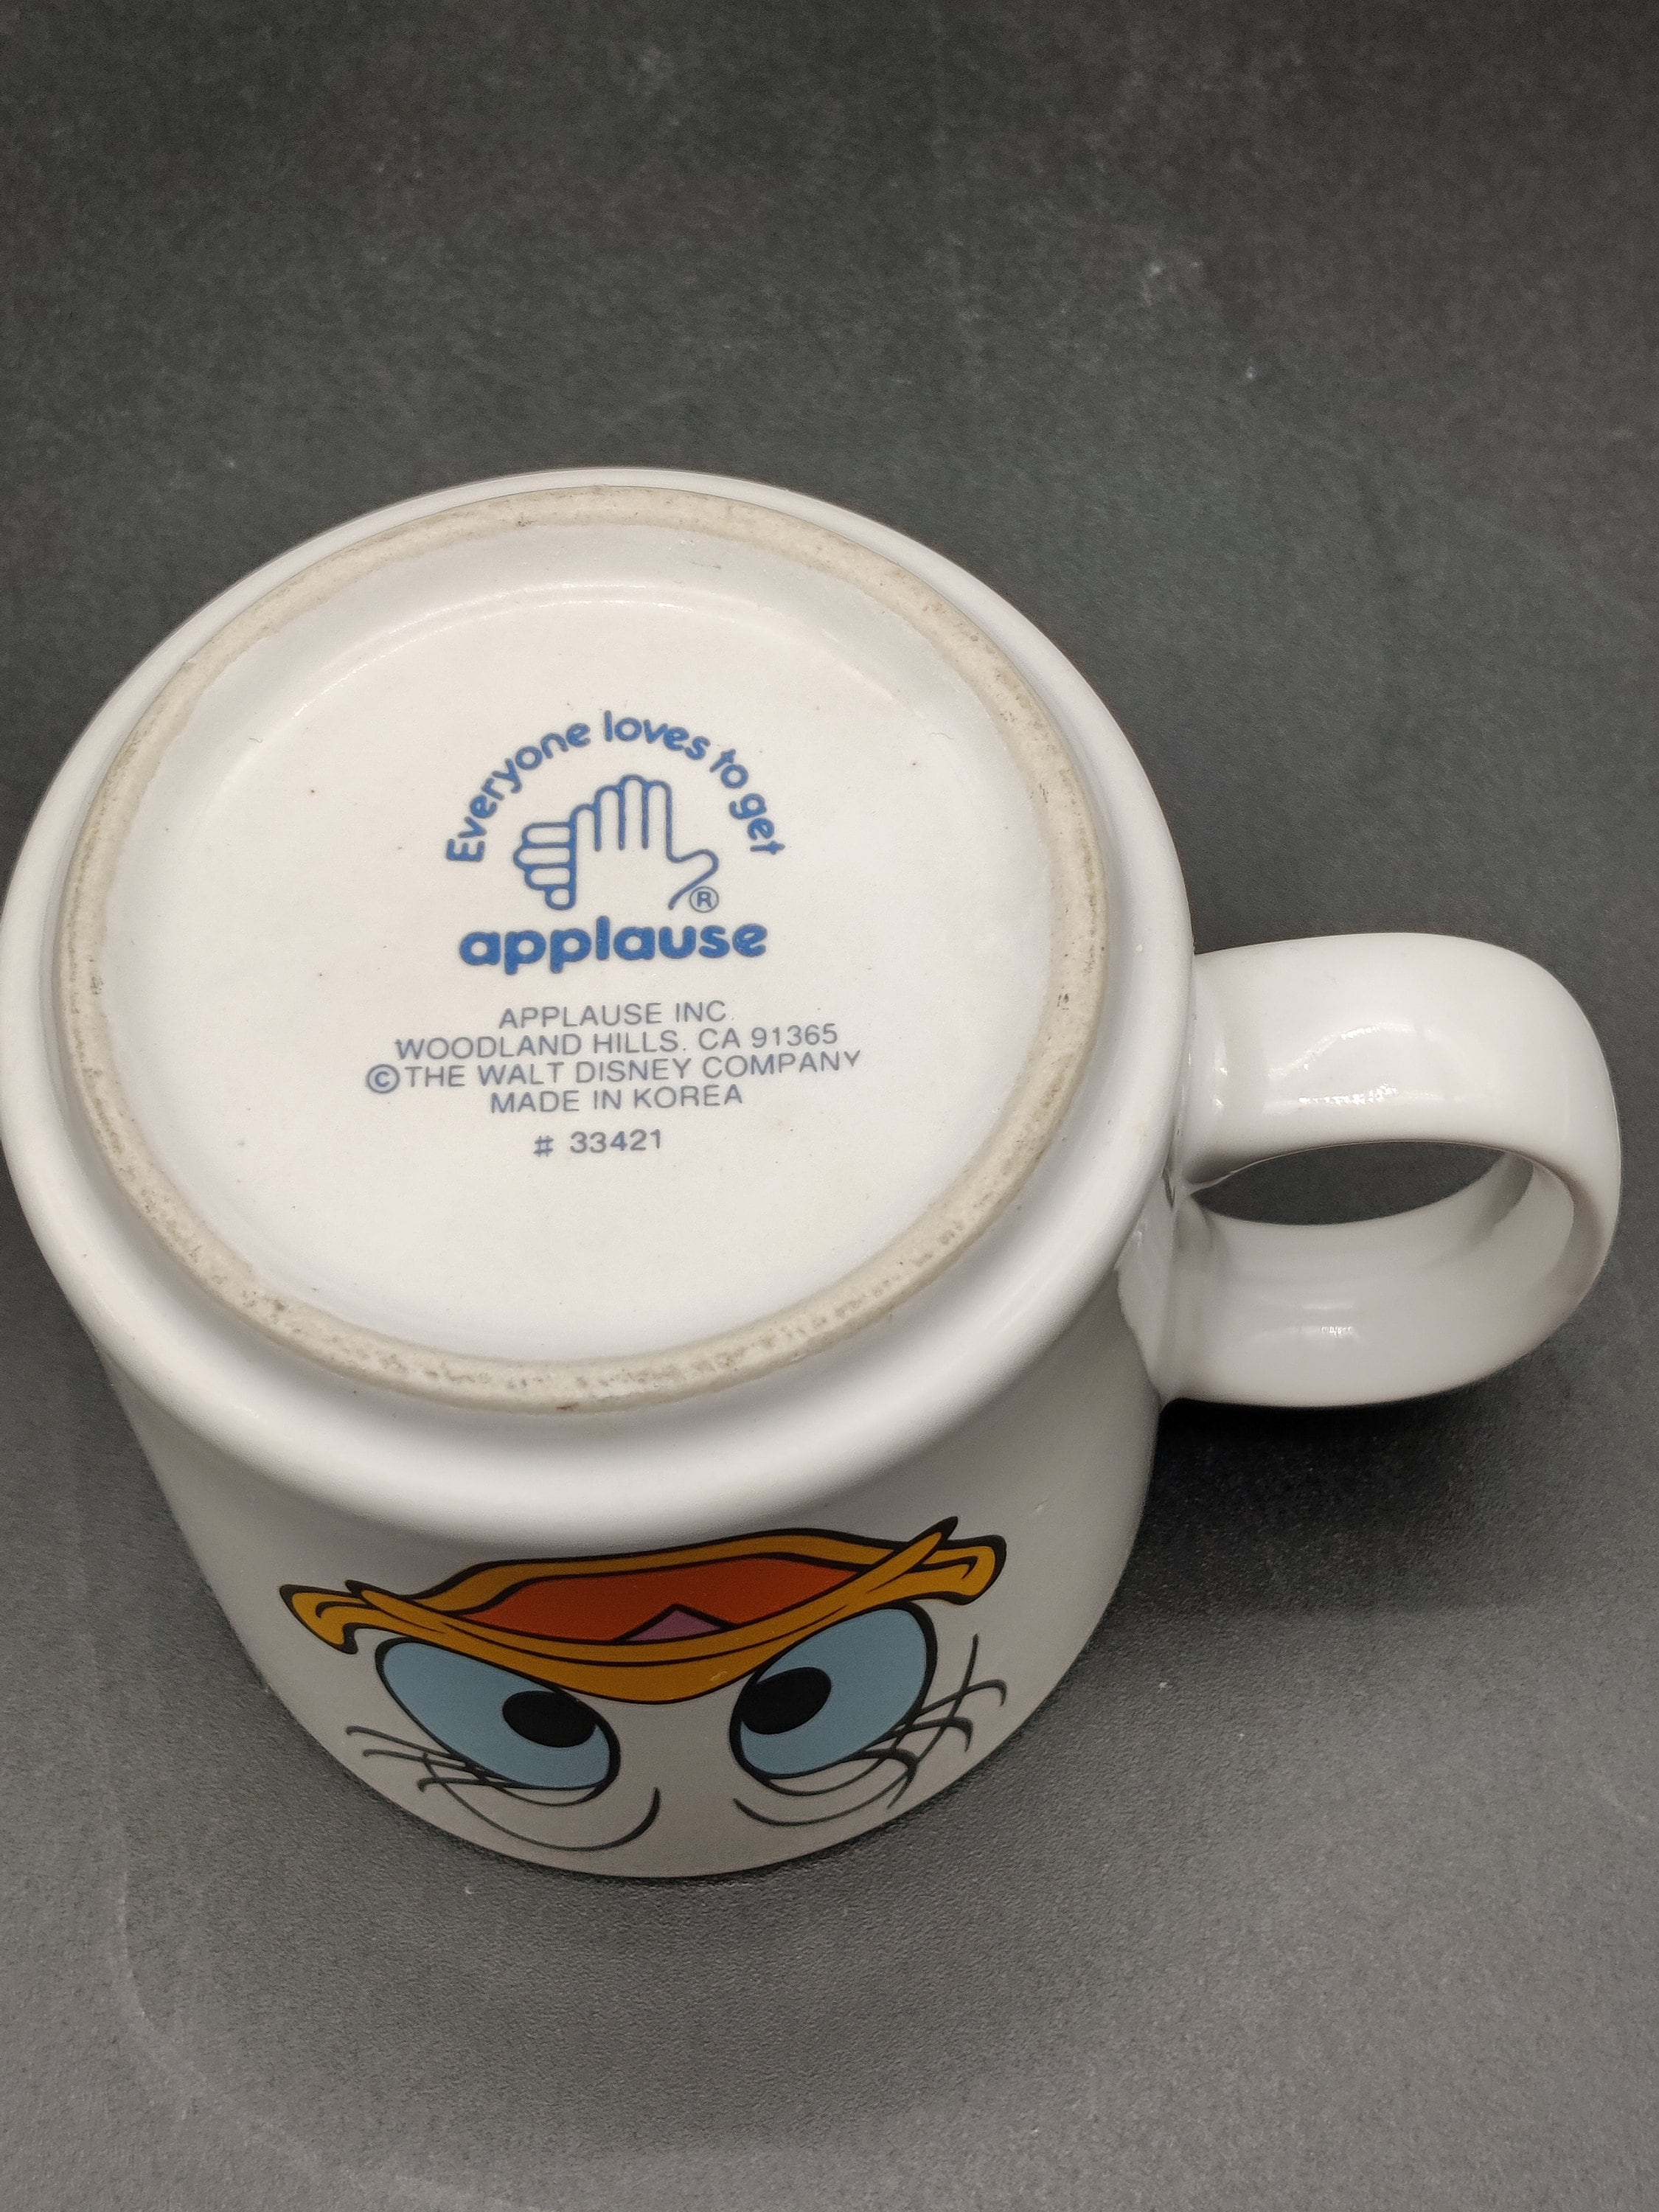 Disney Coffee Cup - Titles - Donald Duck